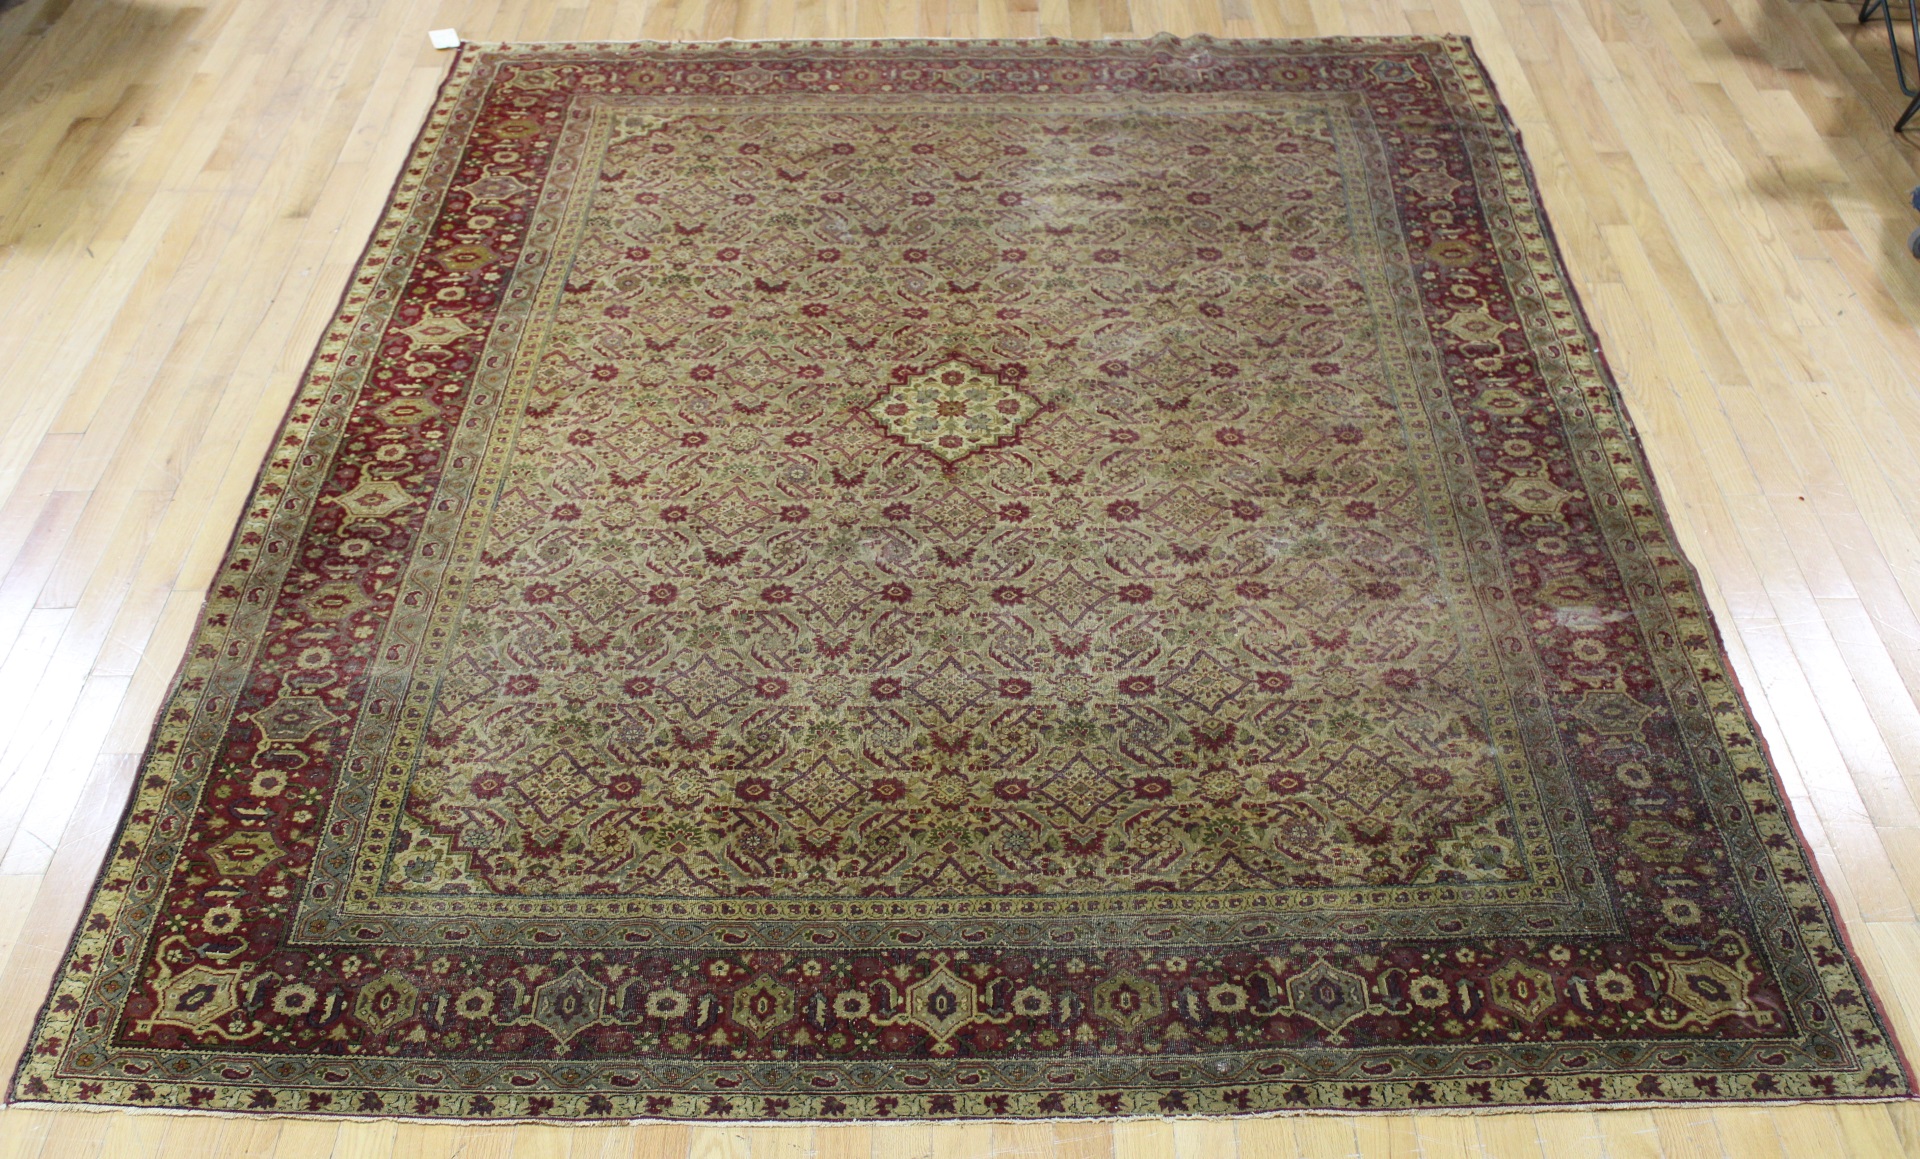 ANTIQUE AND FINELY HAND WOVEN KERMAN